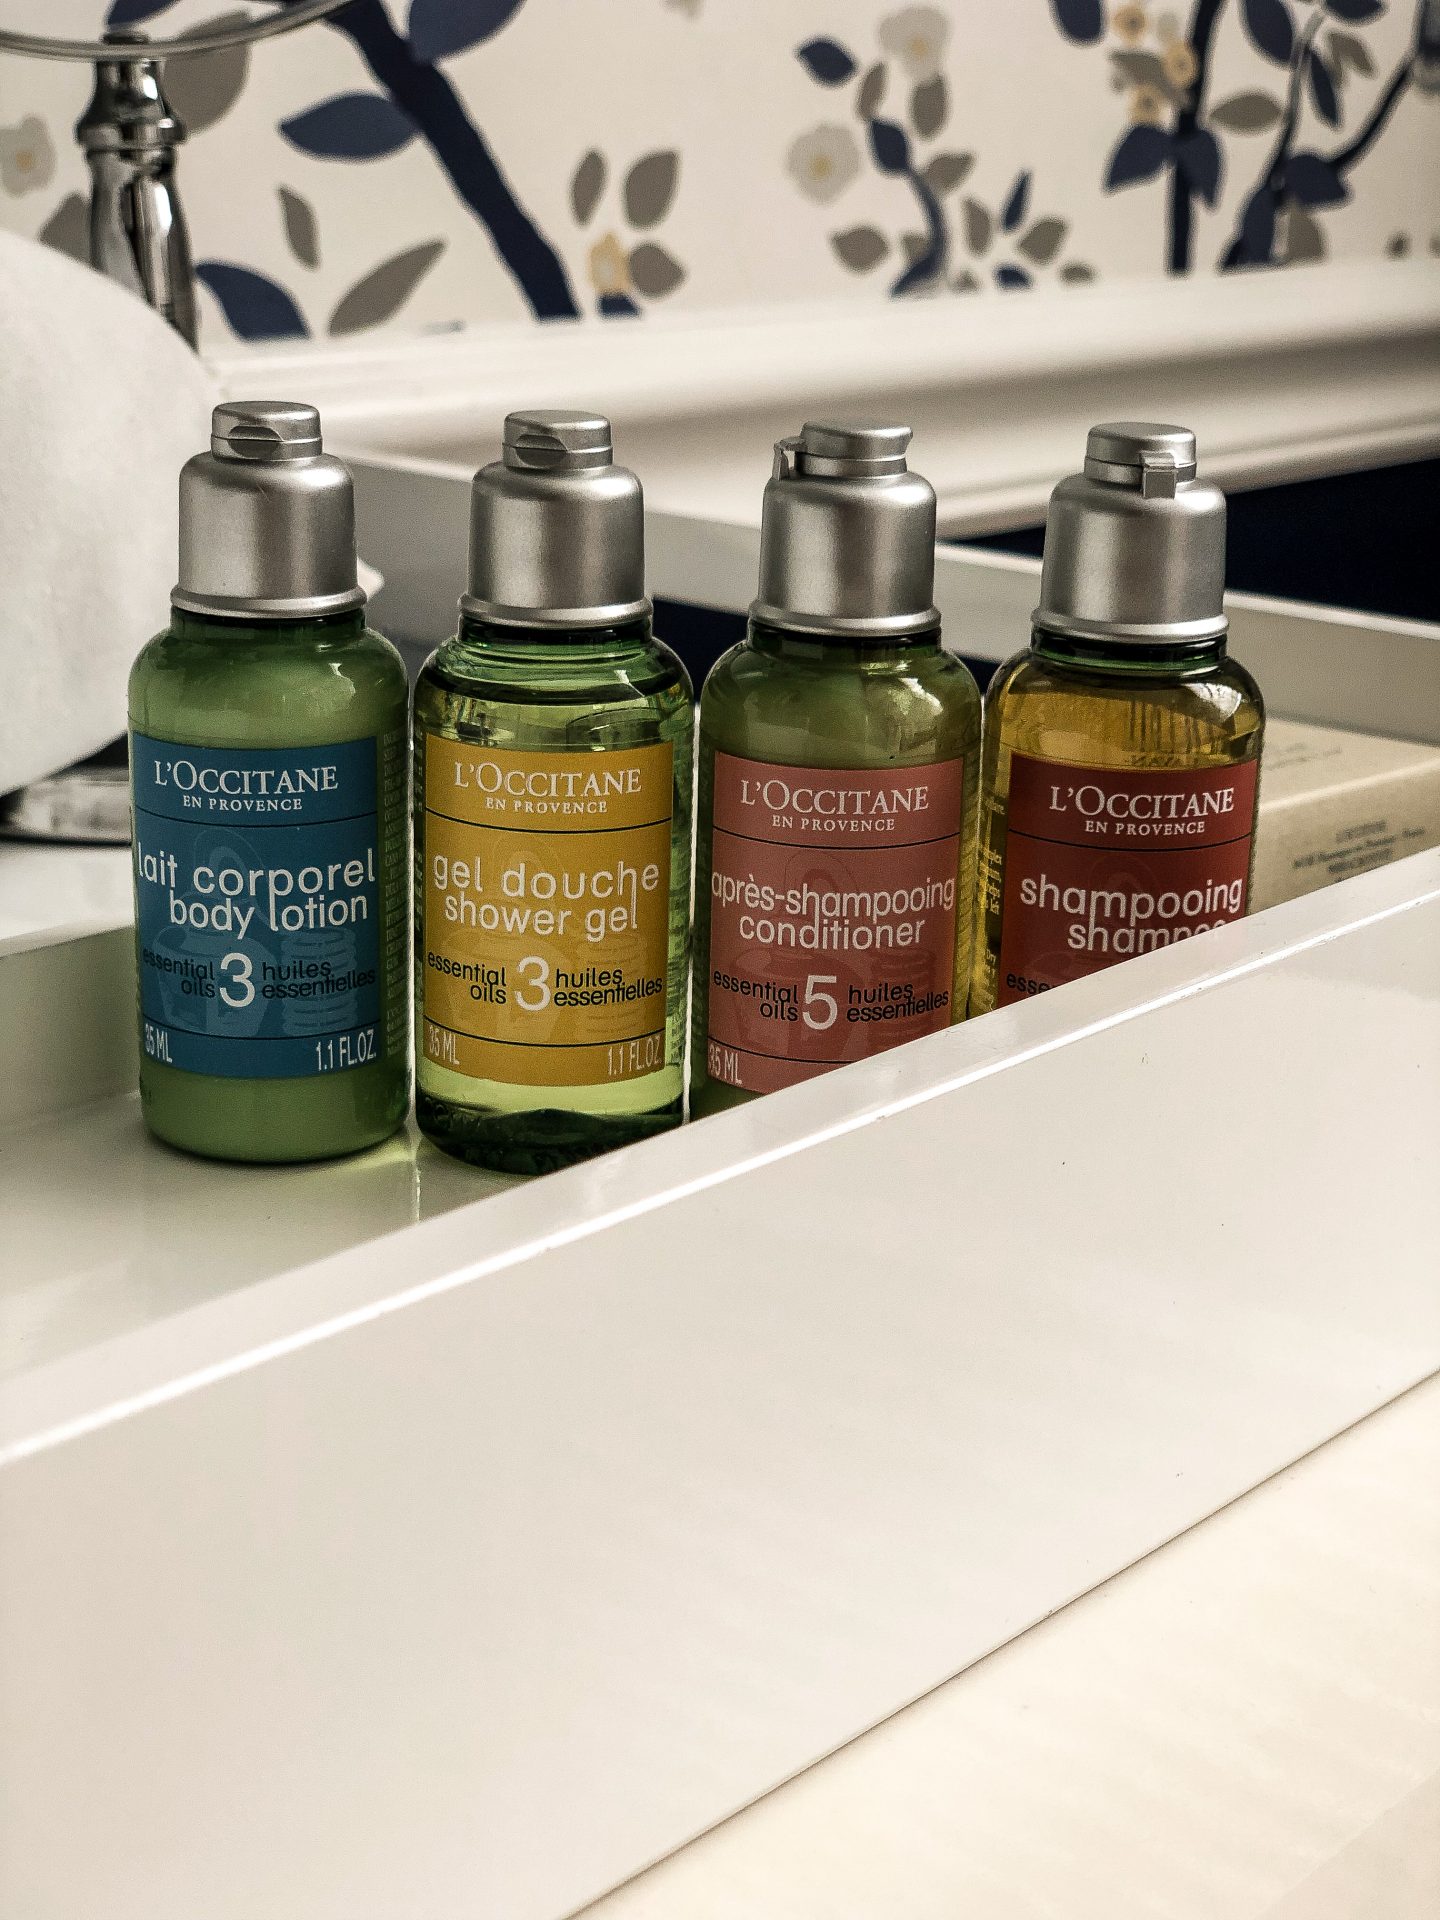 L'Occitane Products in the bathroom of The Independent Hotel